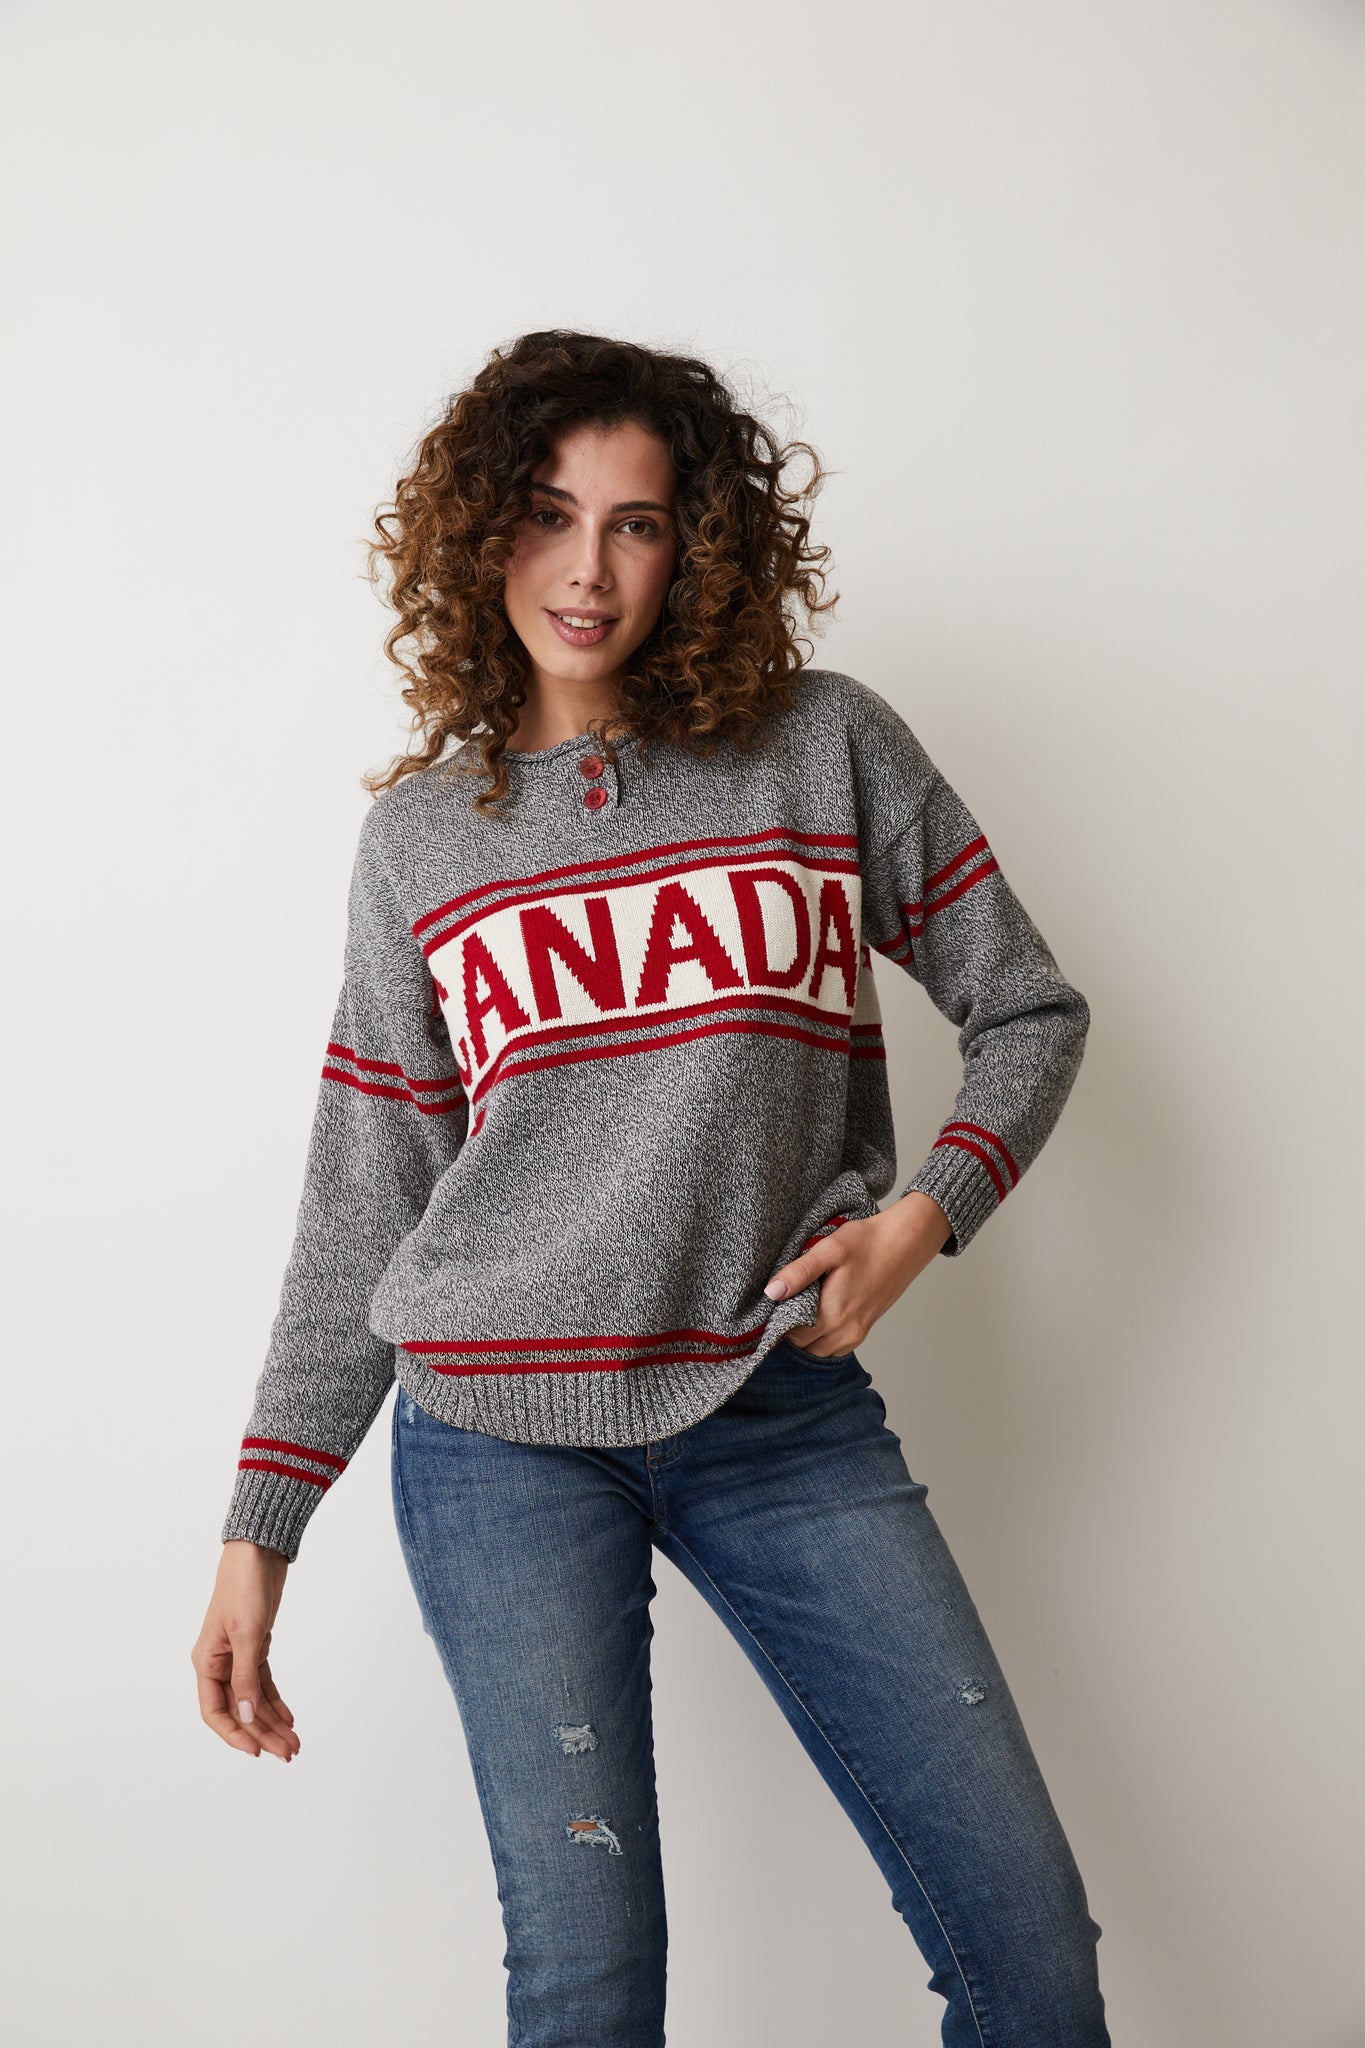 PARKHURST / COTTON COUNTRY - CANADA HENLEY SWEATER - 87281- 2 Colours